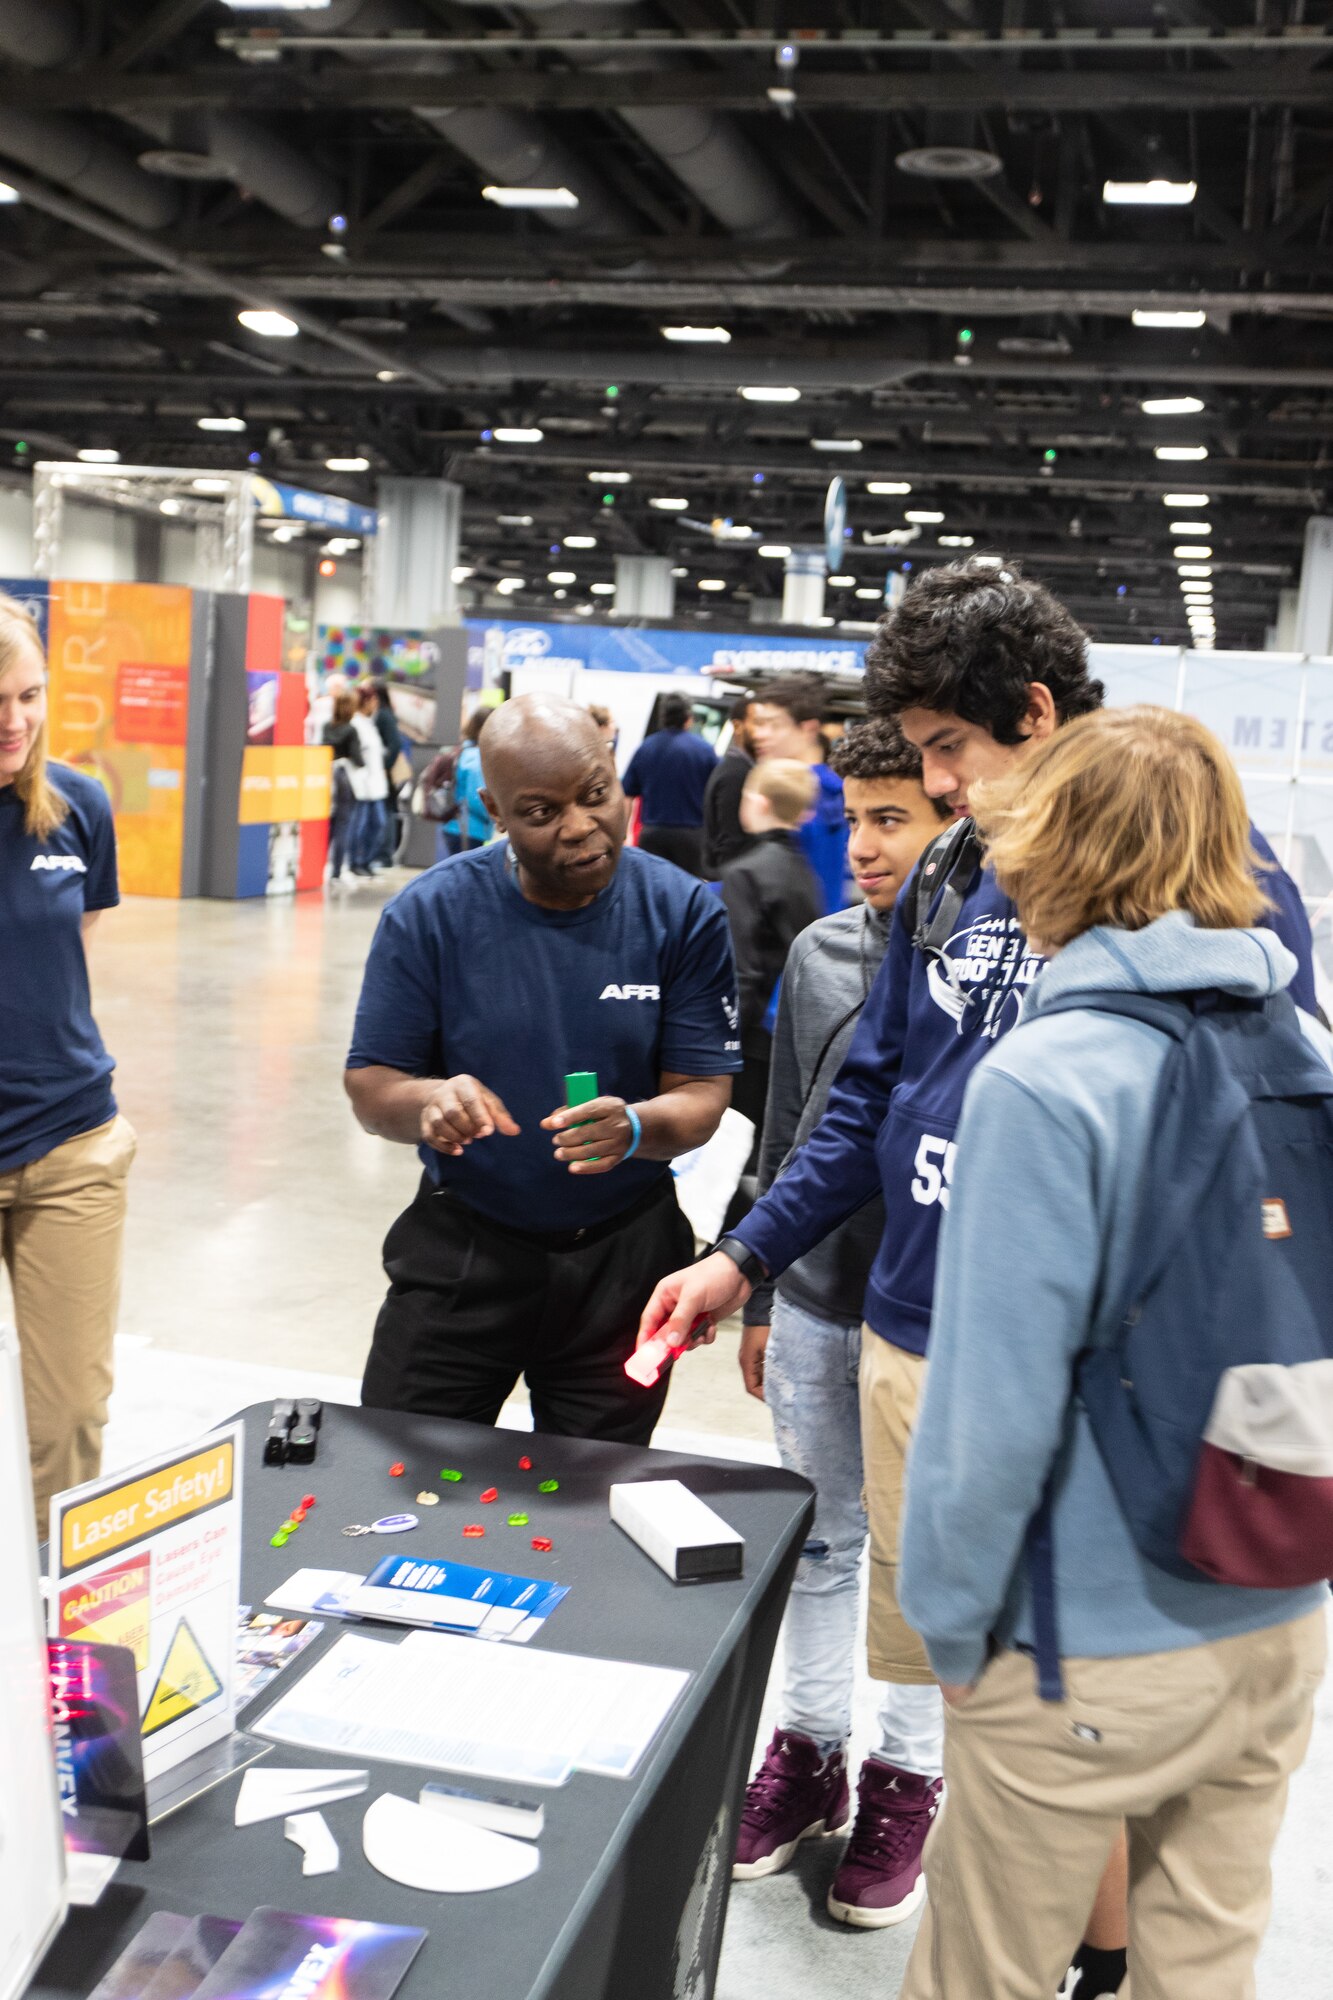 AFRL scientists and engineers inspire the future STEM workforce with experiments and hands on activities at the 5th annual USA Science and Engineering Festival Expo at the Walter E. Washington Convention Center in Washington, D.C. April 6-8, 2018. (U.S. Air Force photo/Brian Mitchell)